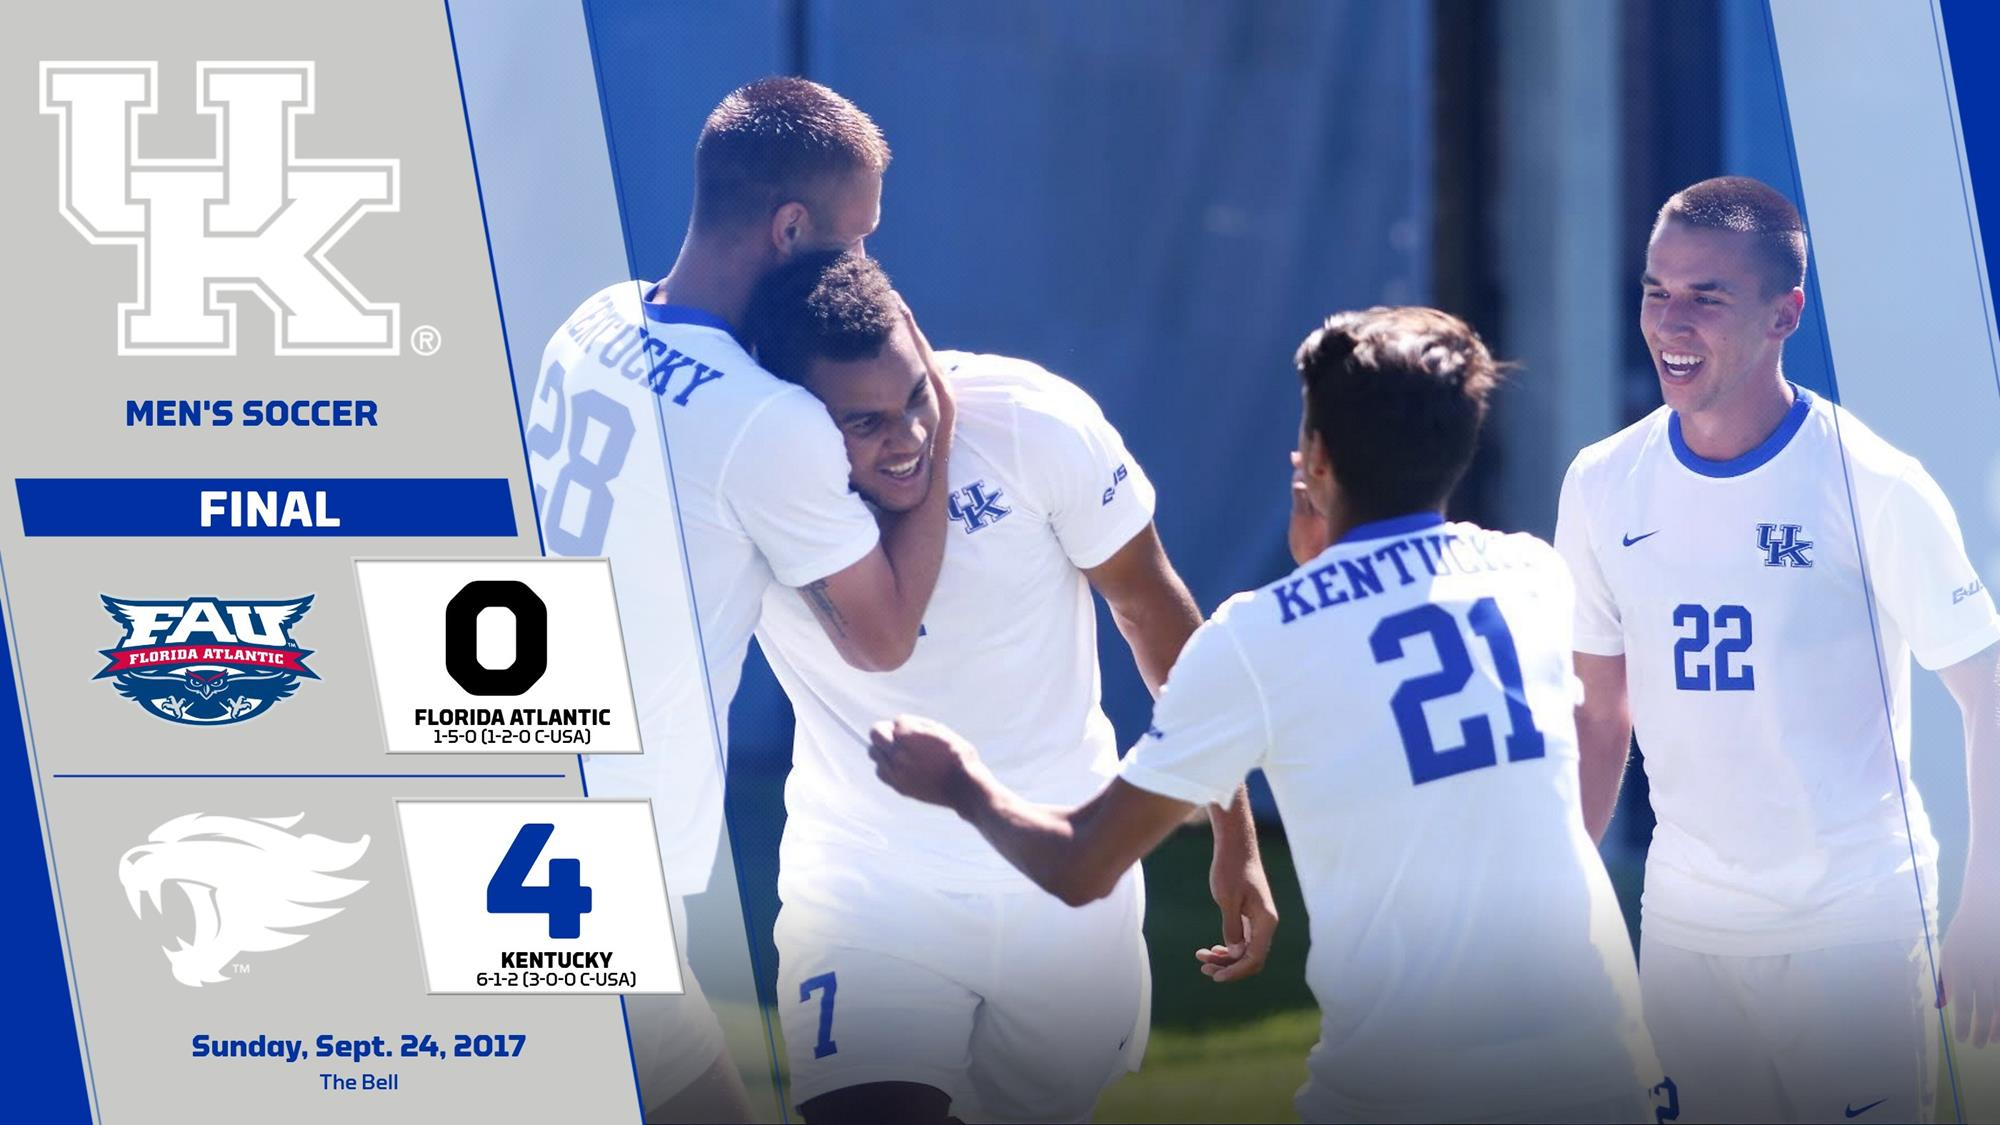 Williams Scores and Assists Twice in UK’s 4-0 win over FAU